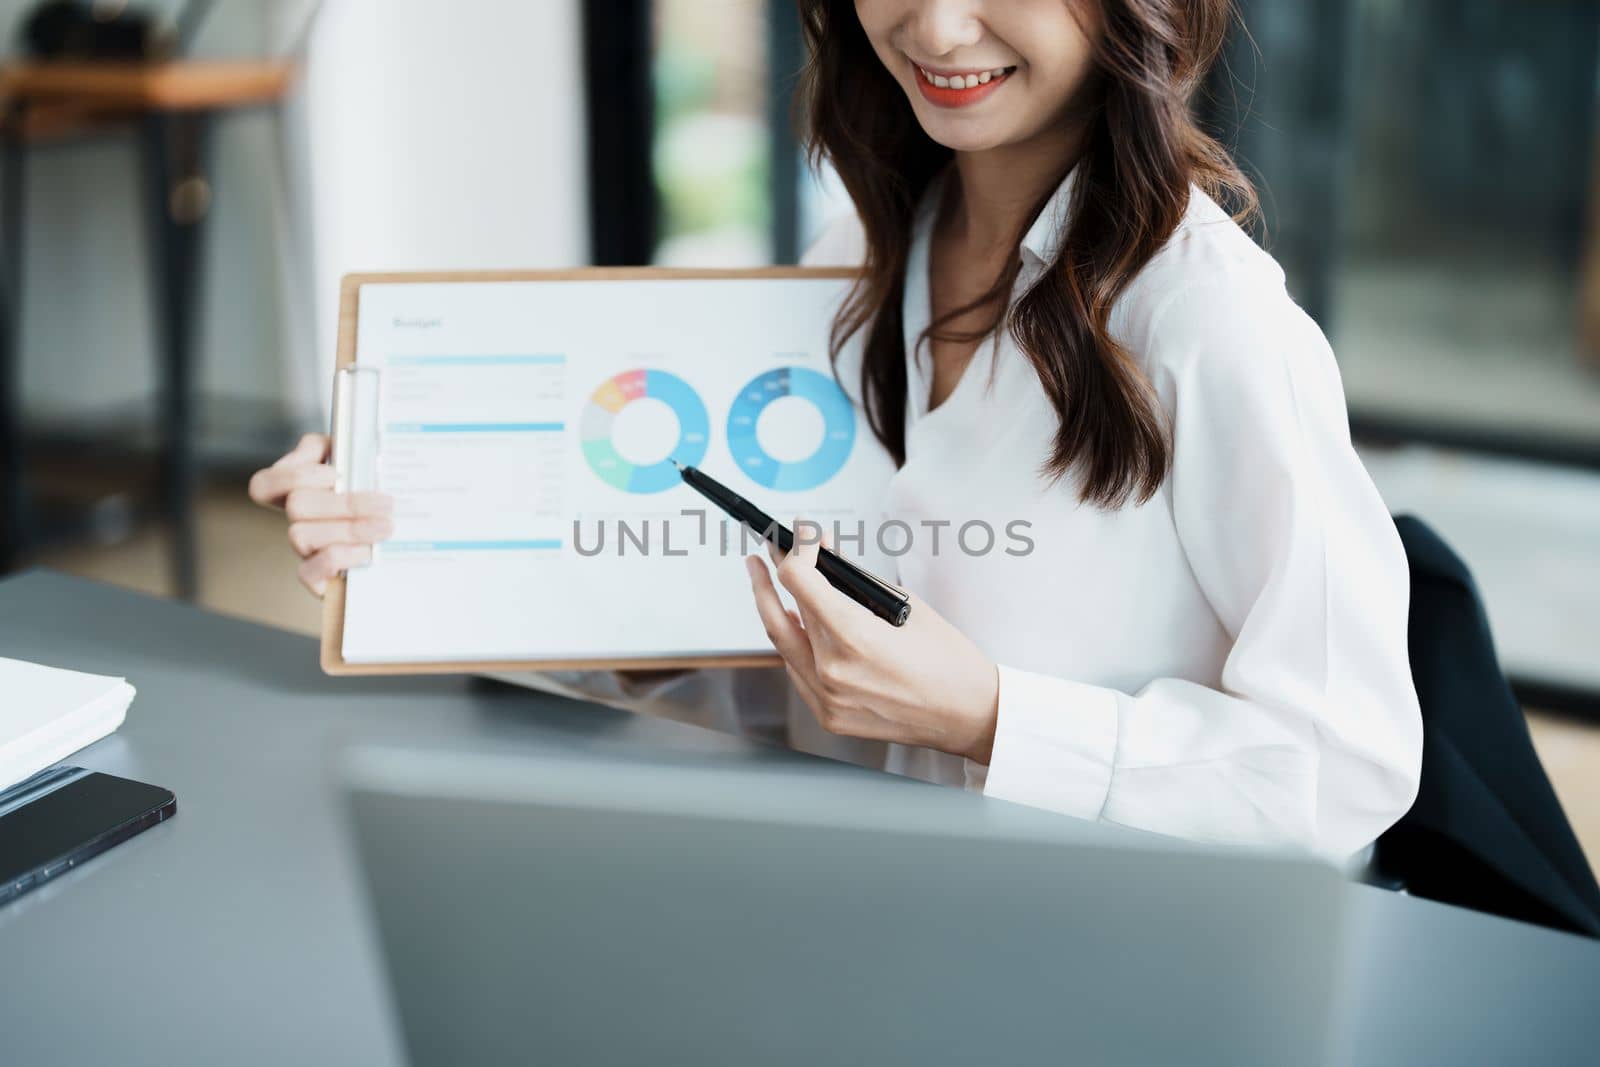 Business work and planning, portrait of a businesswoman using a computer in a meeting.